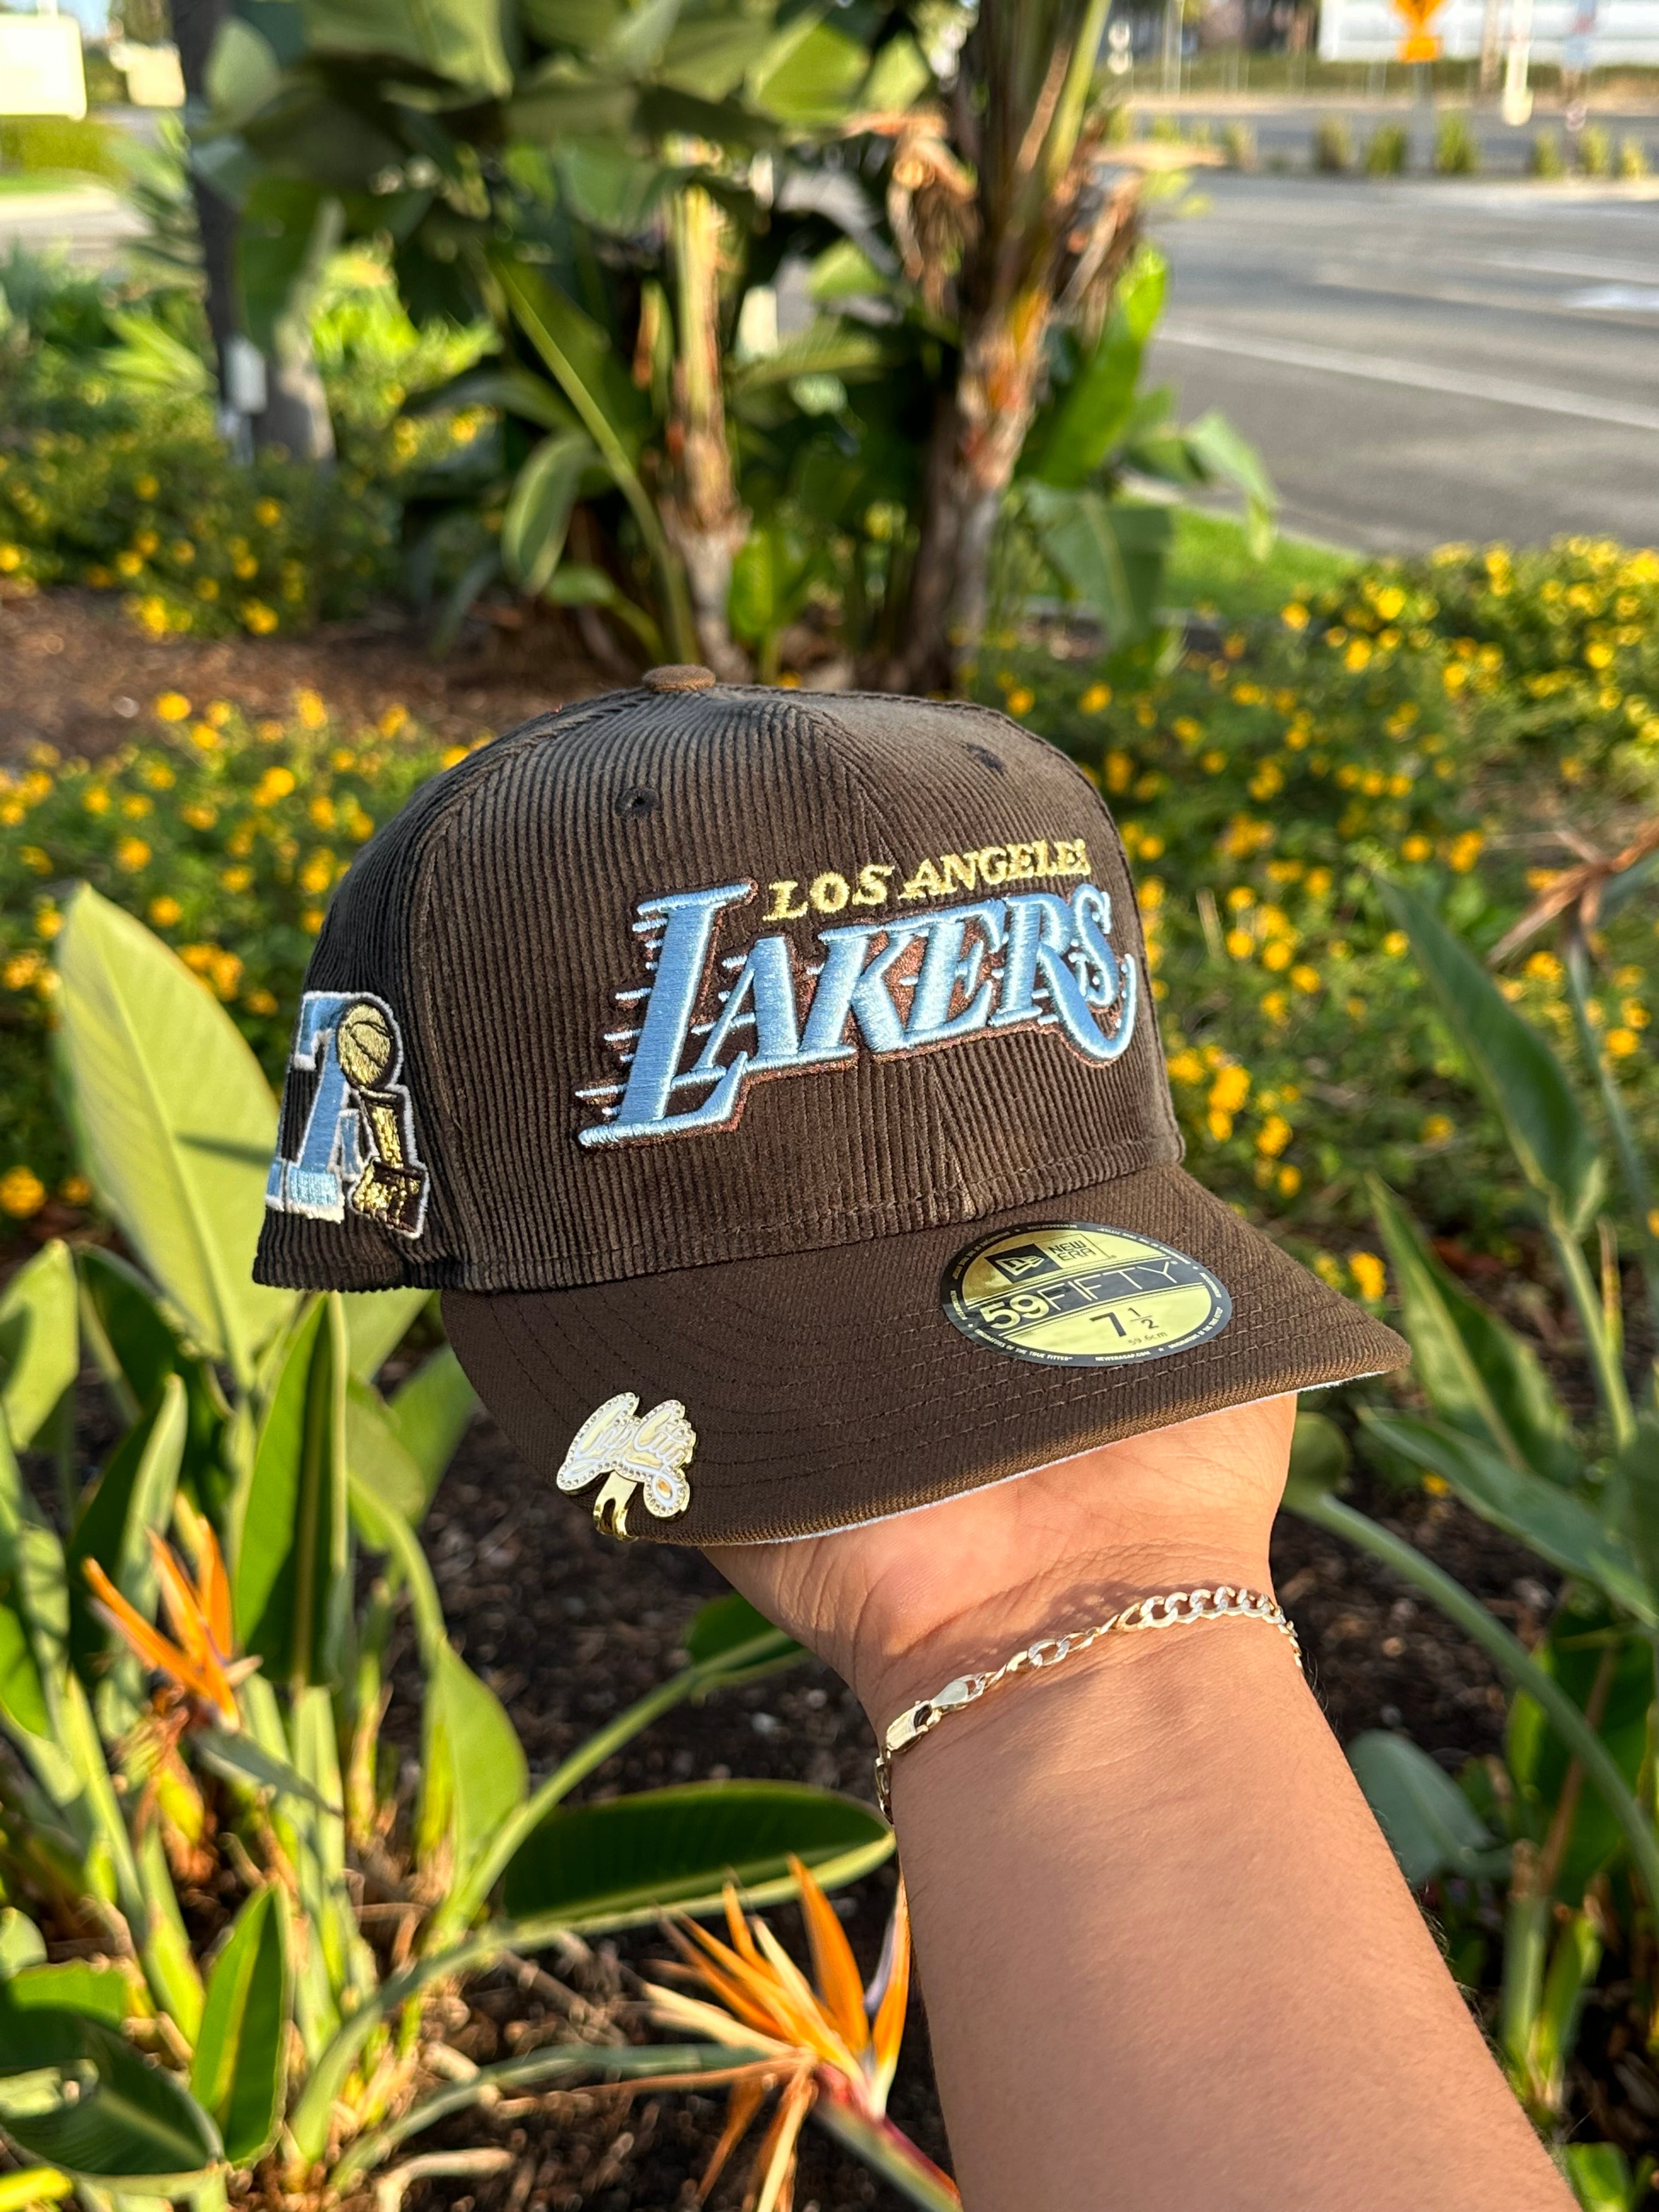 NEW ERA EXCLUSIVE 59FIFTY CORDUROY/WALNUT LOS ANGELES LAKERS W/ 17X CHAMPIONS PATCH + 2020 CHAMPS PATCH